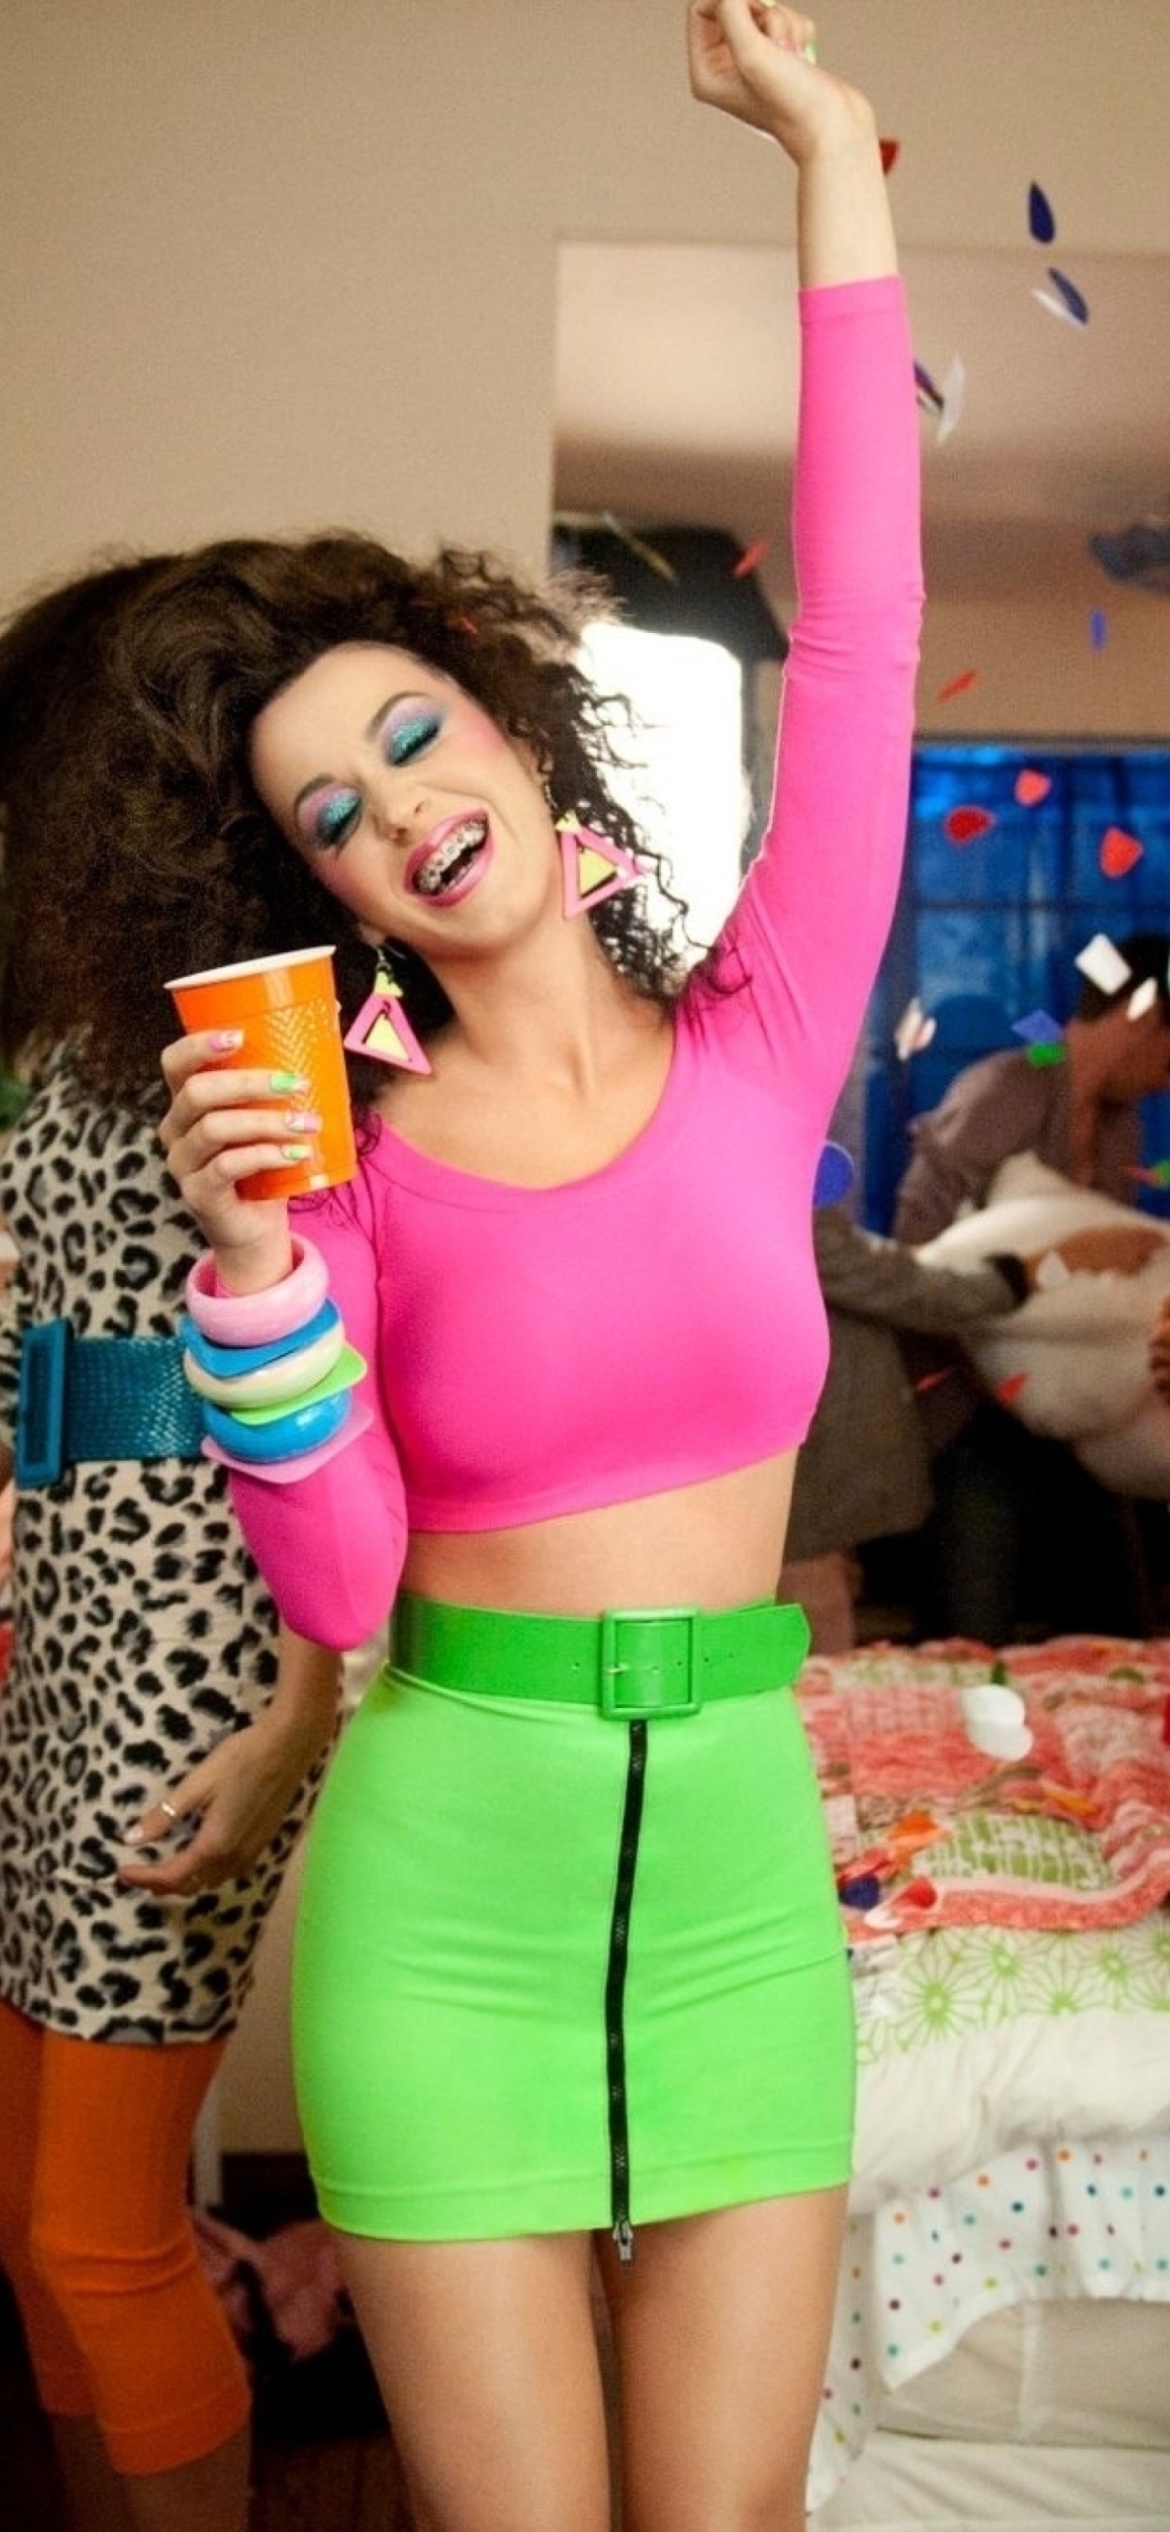 Katy Perry Party wallpaper 1170x2532